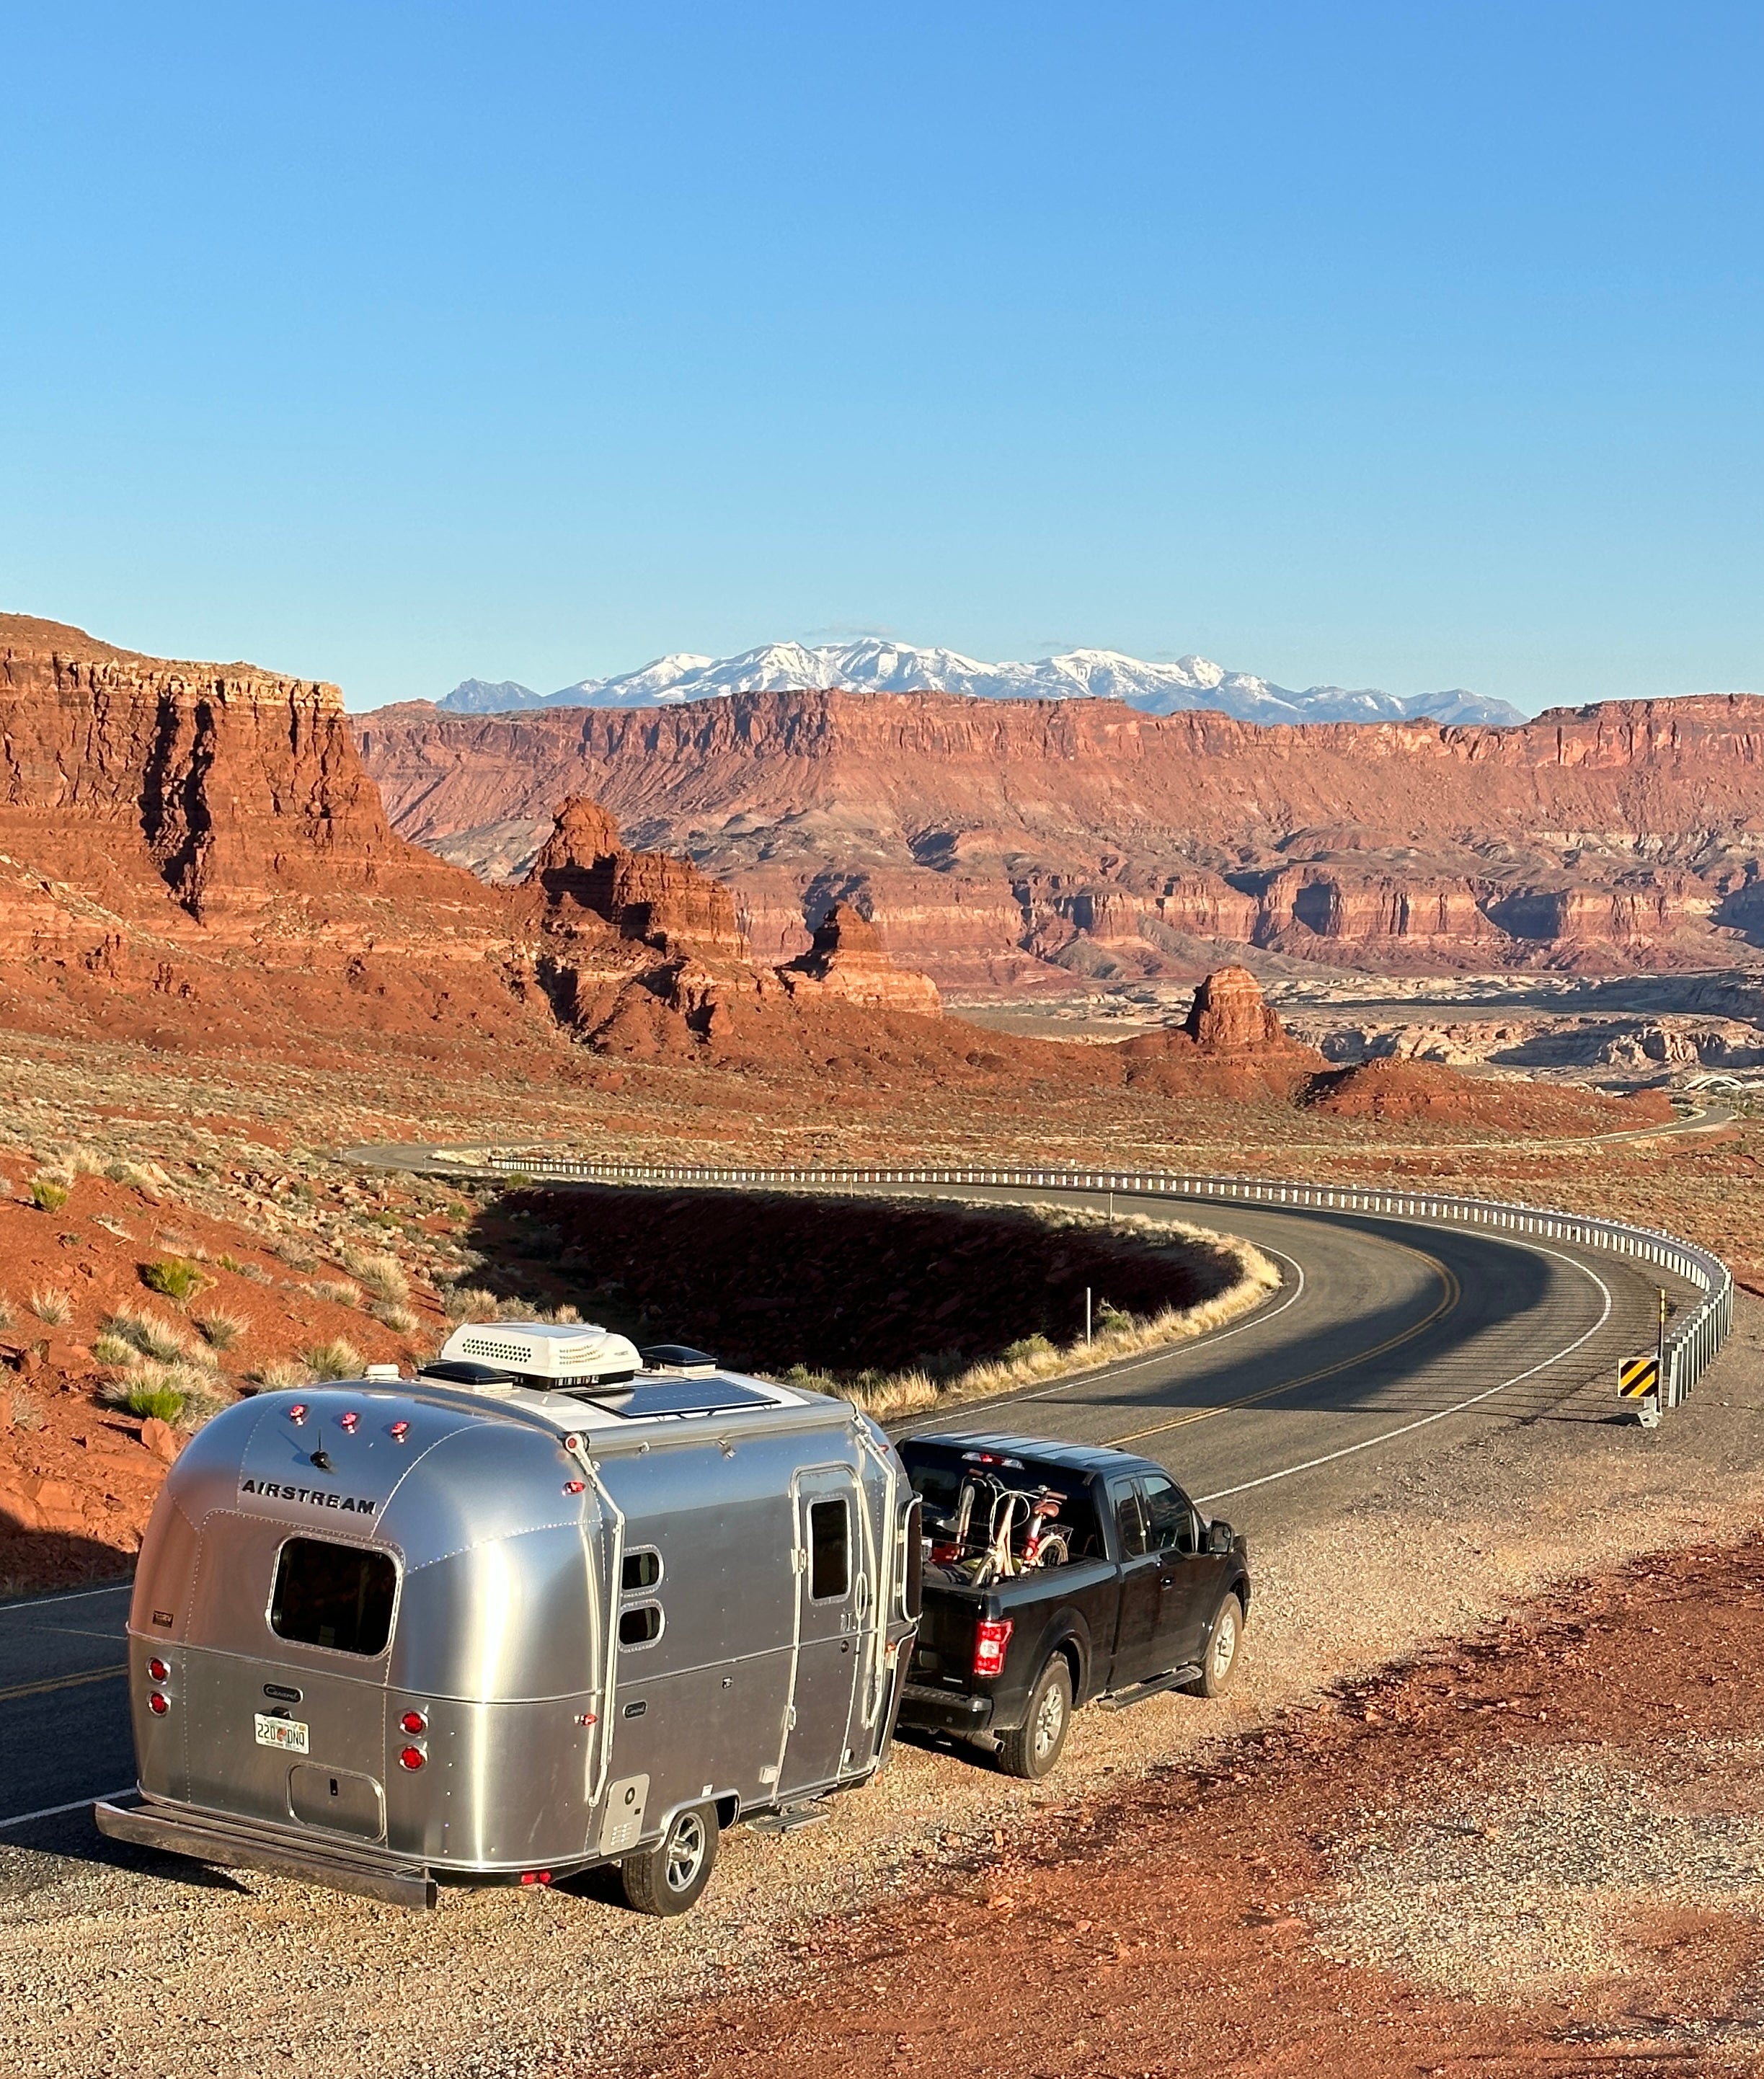 Camper submitted image from Colorado River Hite Bridge - 2